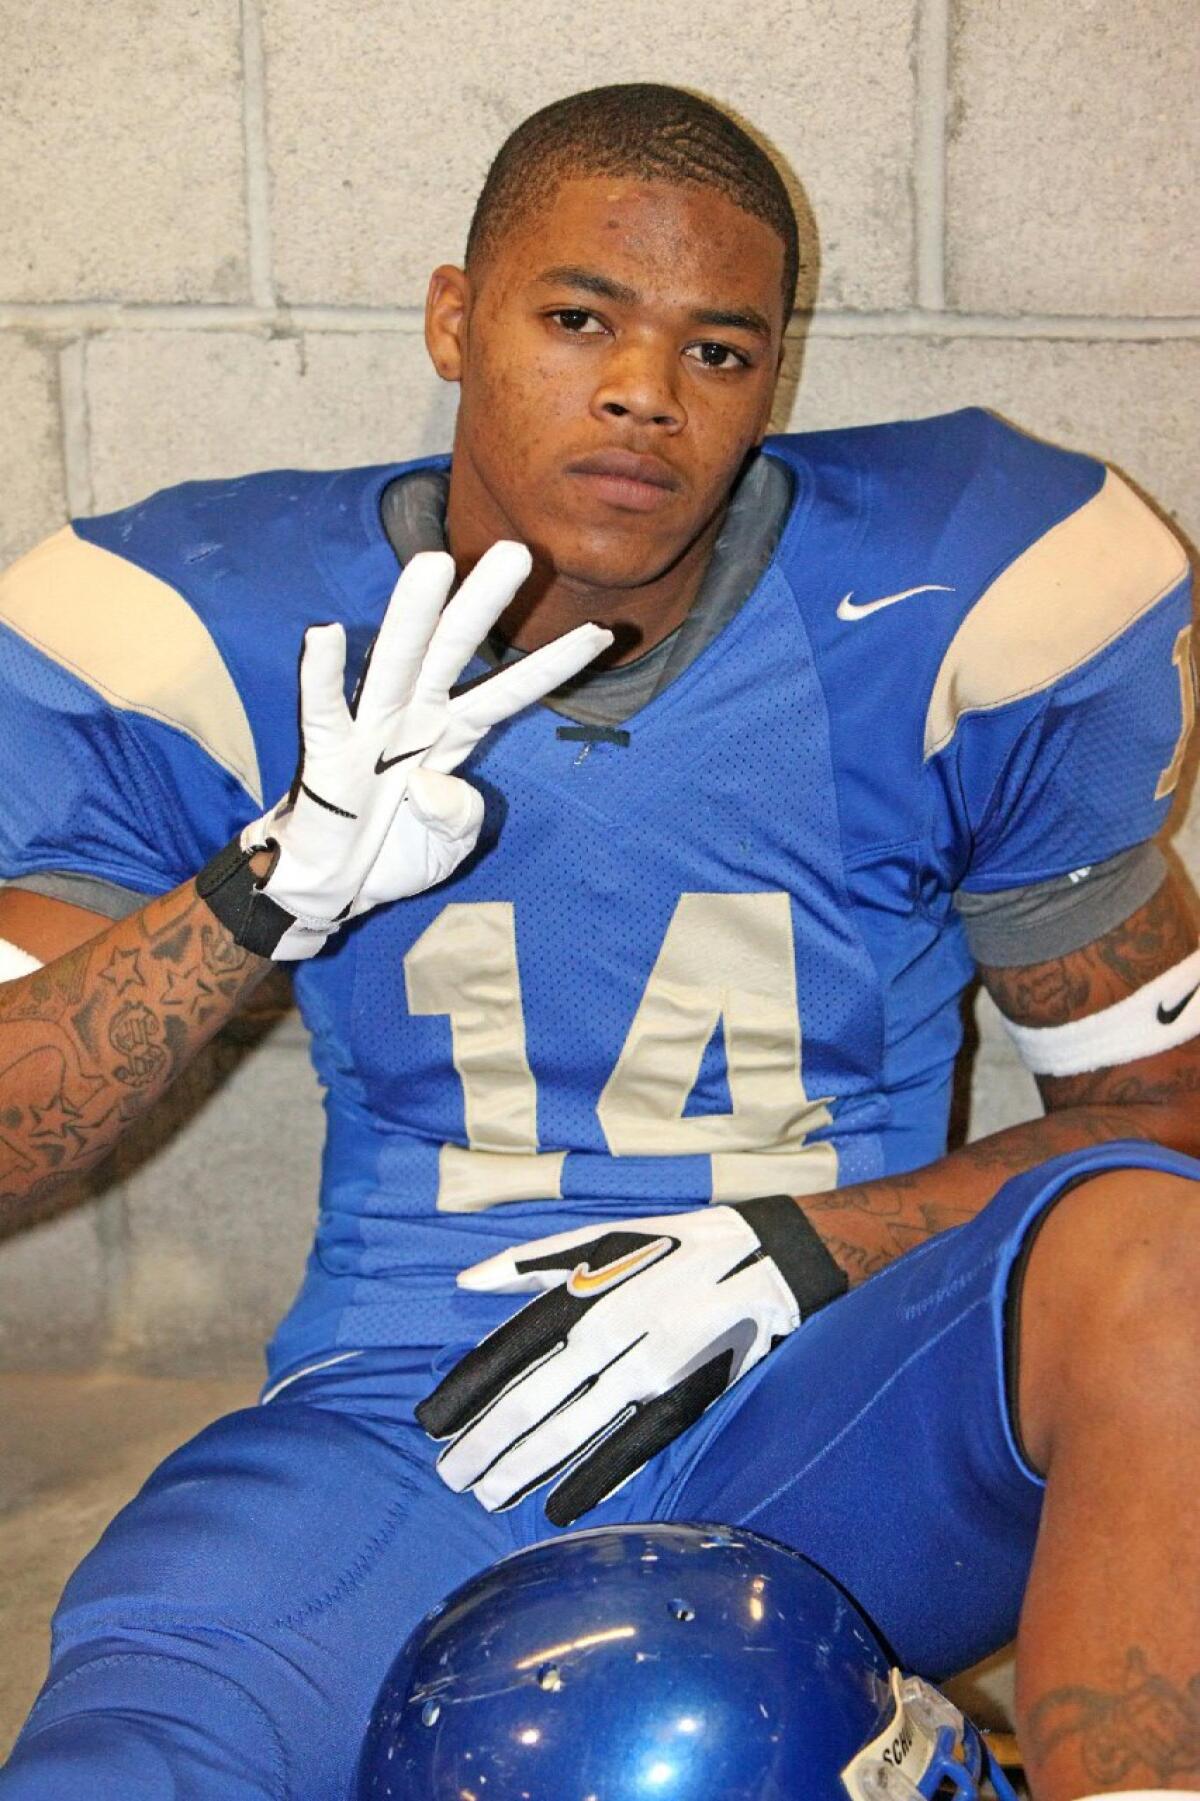 Former Crenshaw football player Geno Hall, the City Section player of the year in 2009, died on July 13 after an illness.